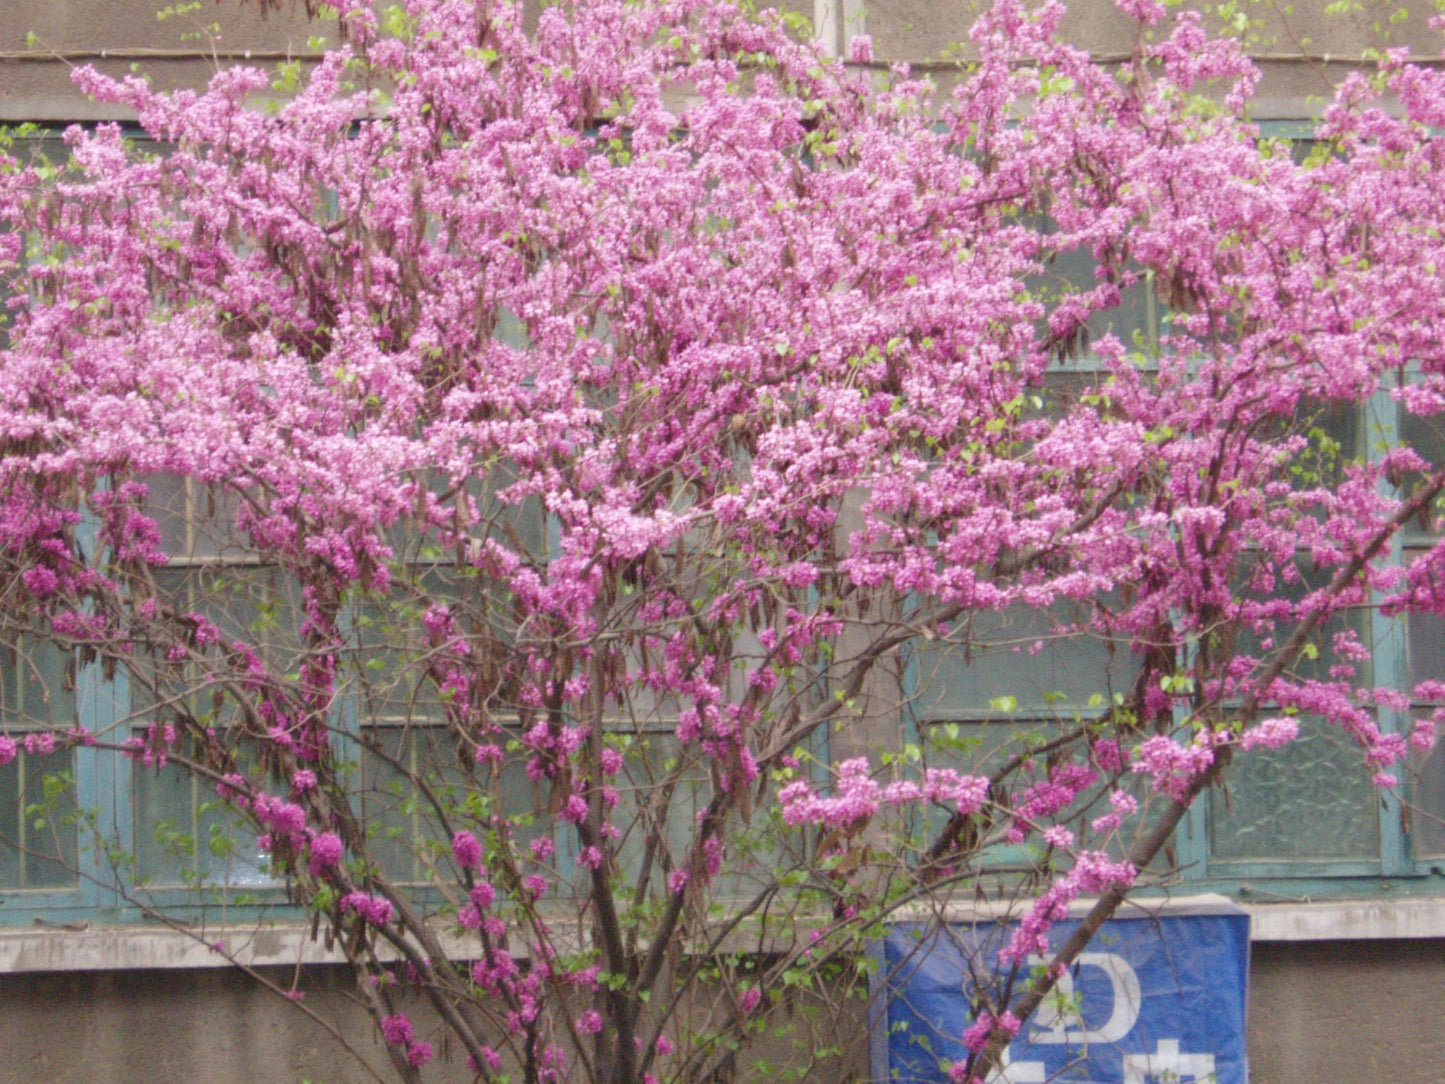 Cercis Chinensis * Magnificent Chinese Redbud * Rare * 30 Seeds *